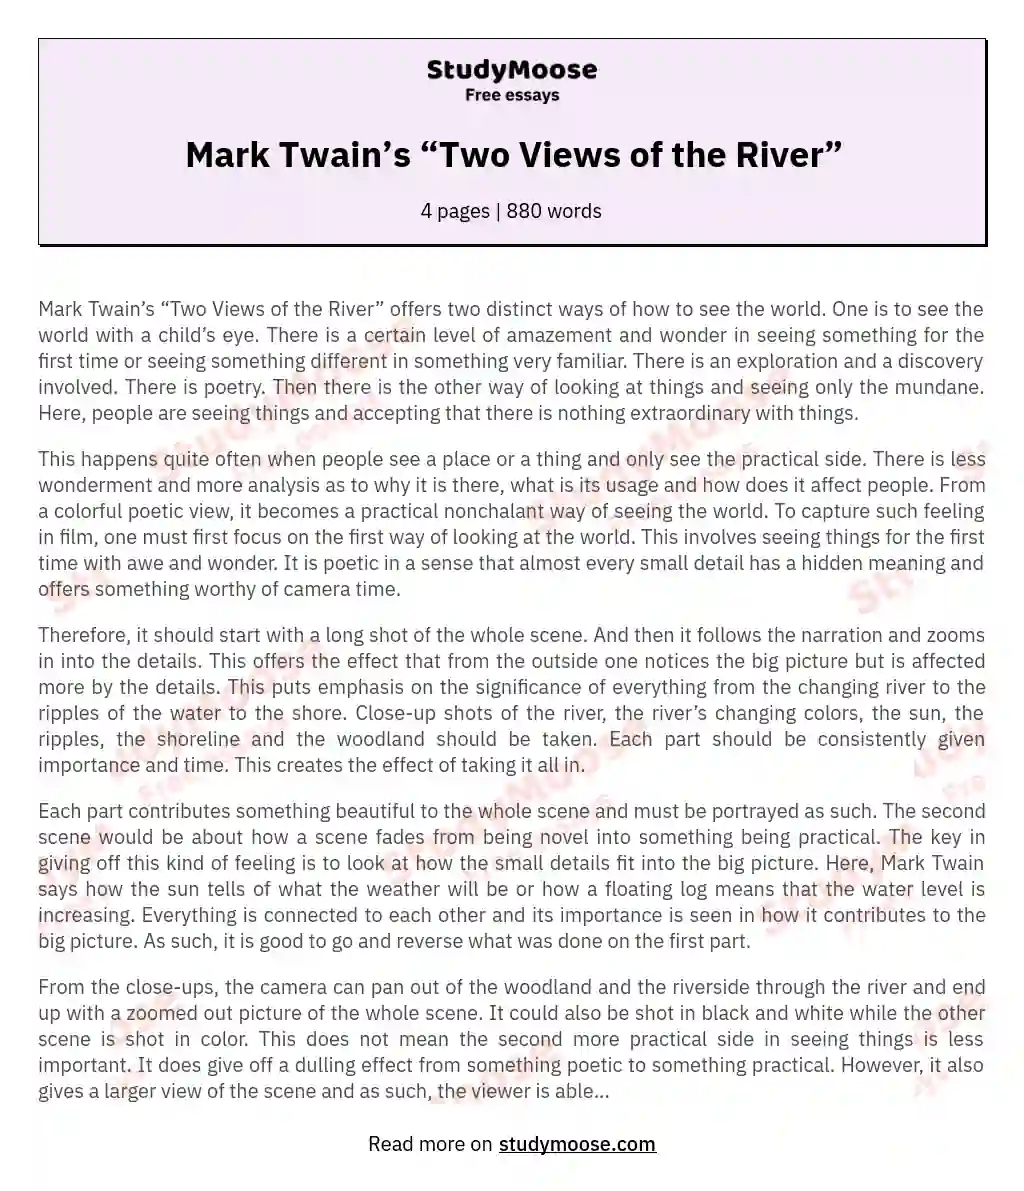 Mark Twain’s “Two Views of the River”